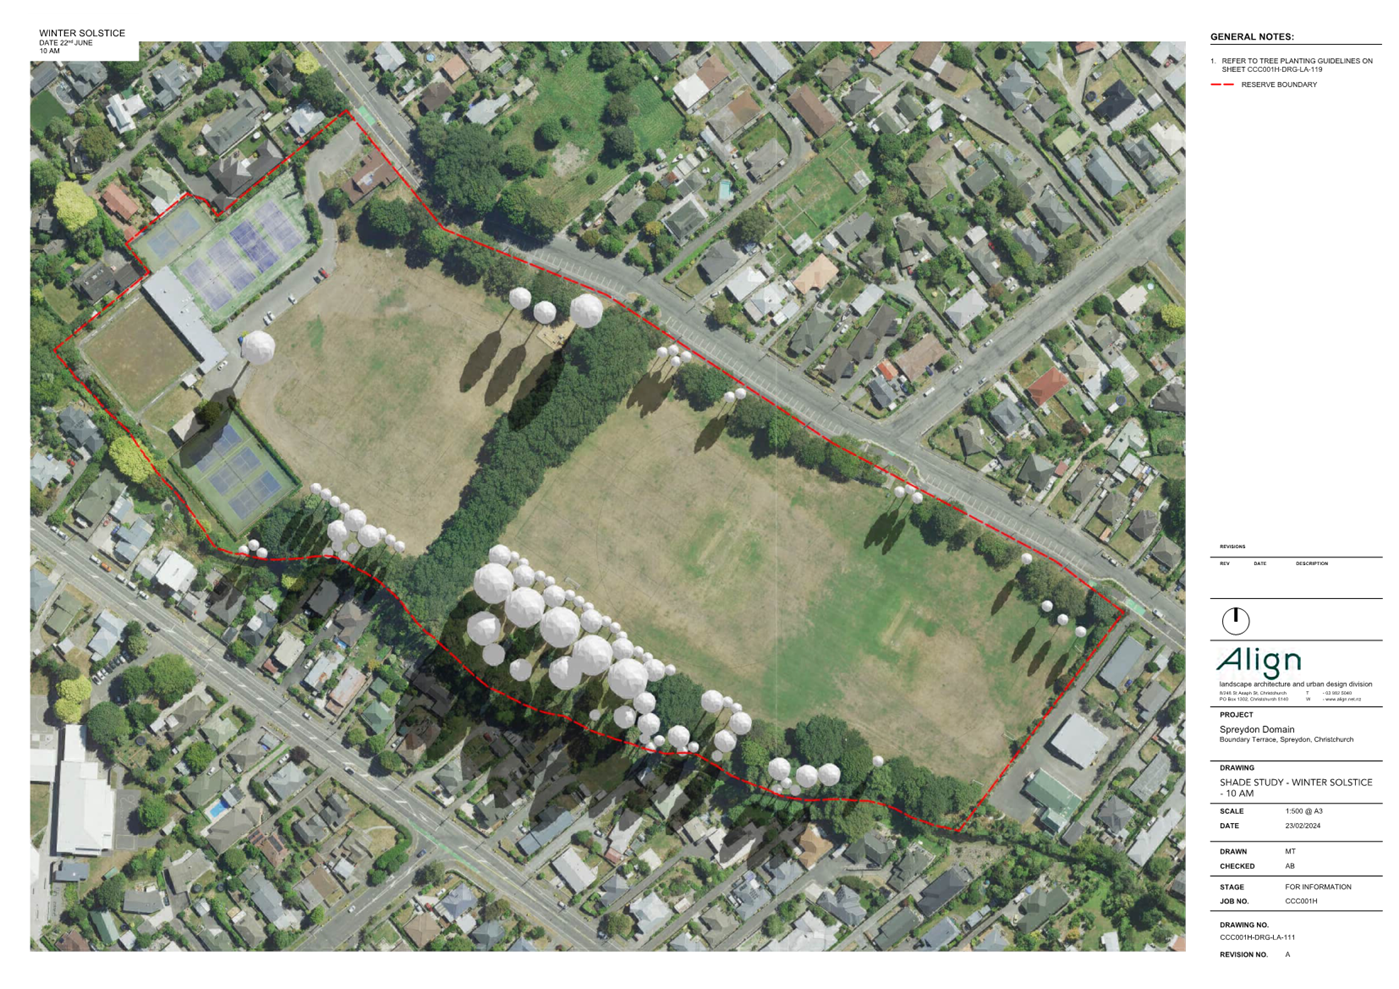 An aerial view of a park

Description automatically generated